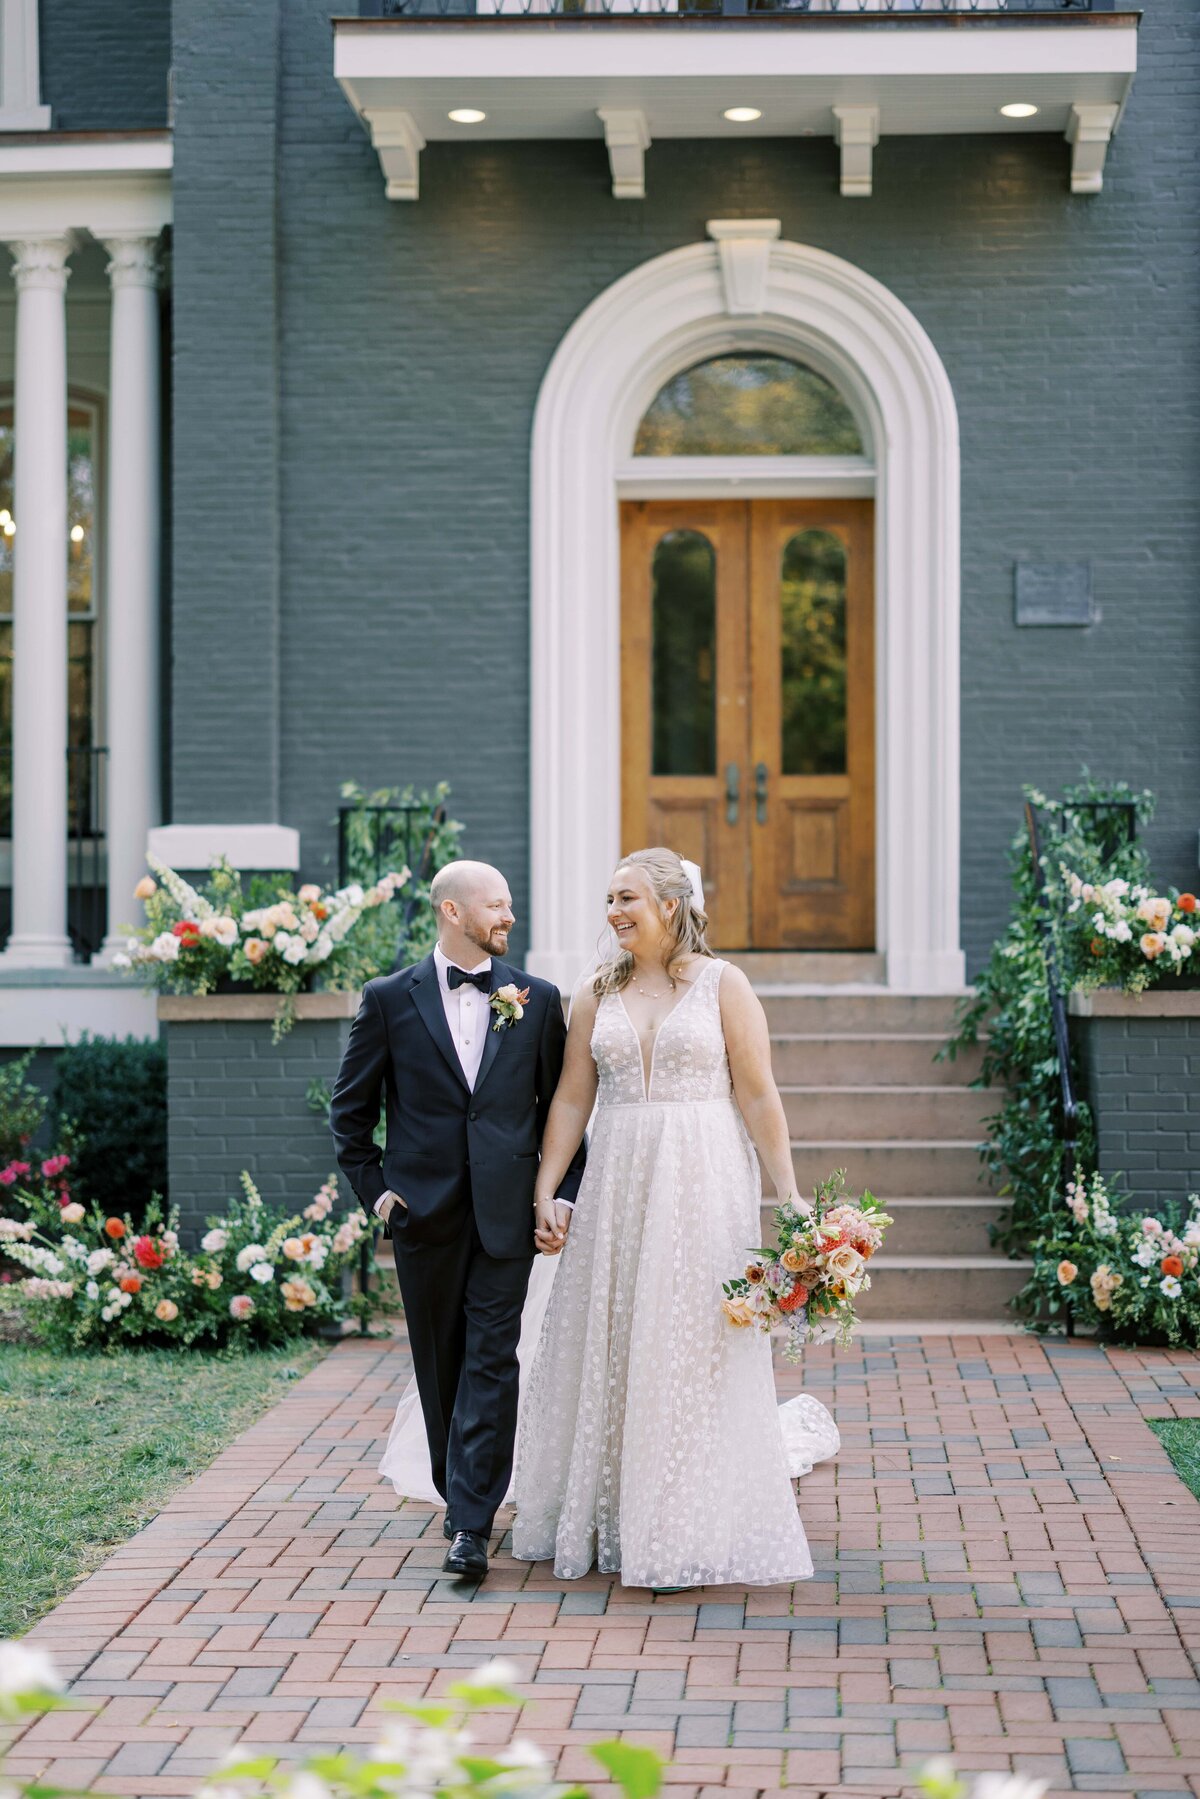 Danielle-Defayette-Photography-Heights-House-Wedding-Raleigh-359